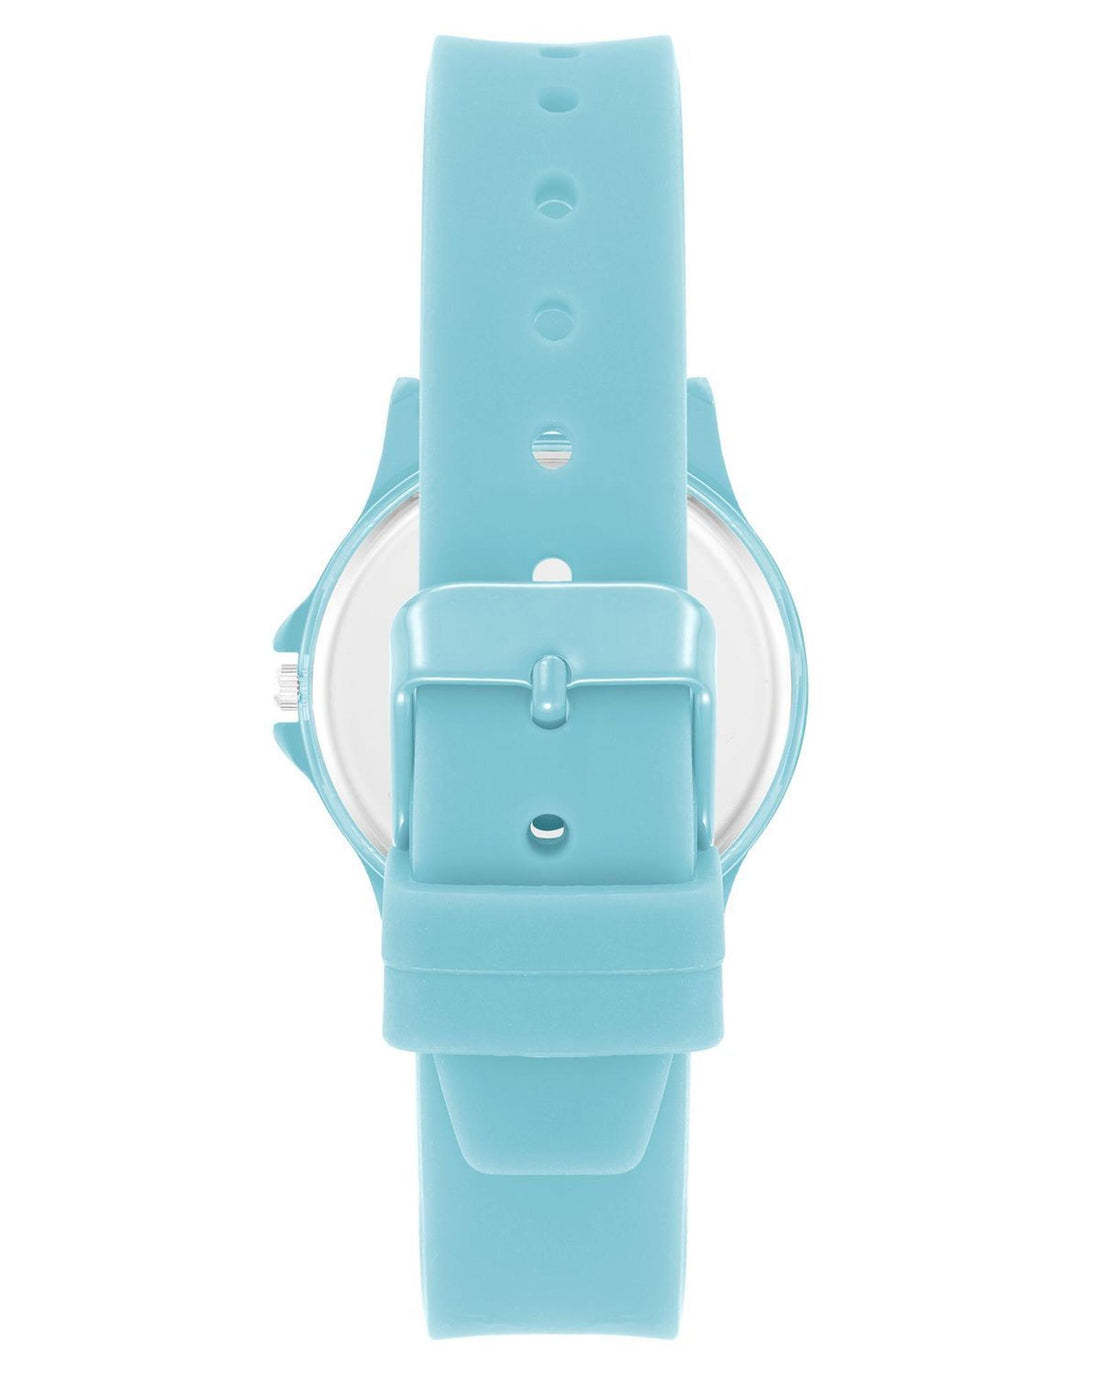 Blue Analog Fashion Watch with Rhine Stone Facing and Pin Buckle Closure One Size Women-Women&